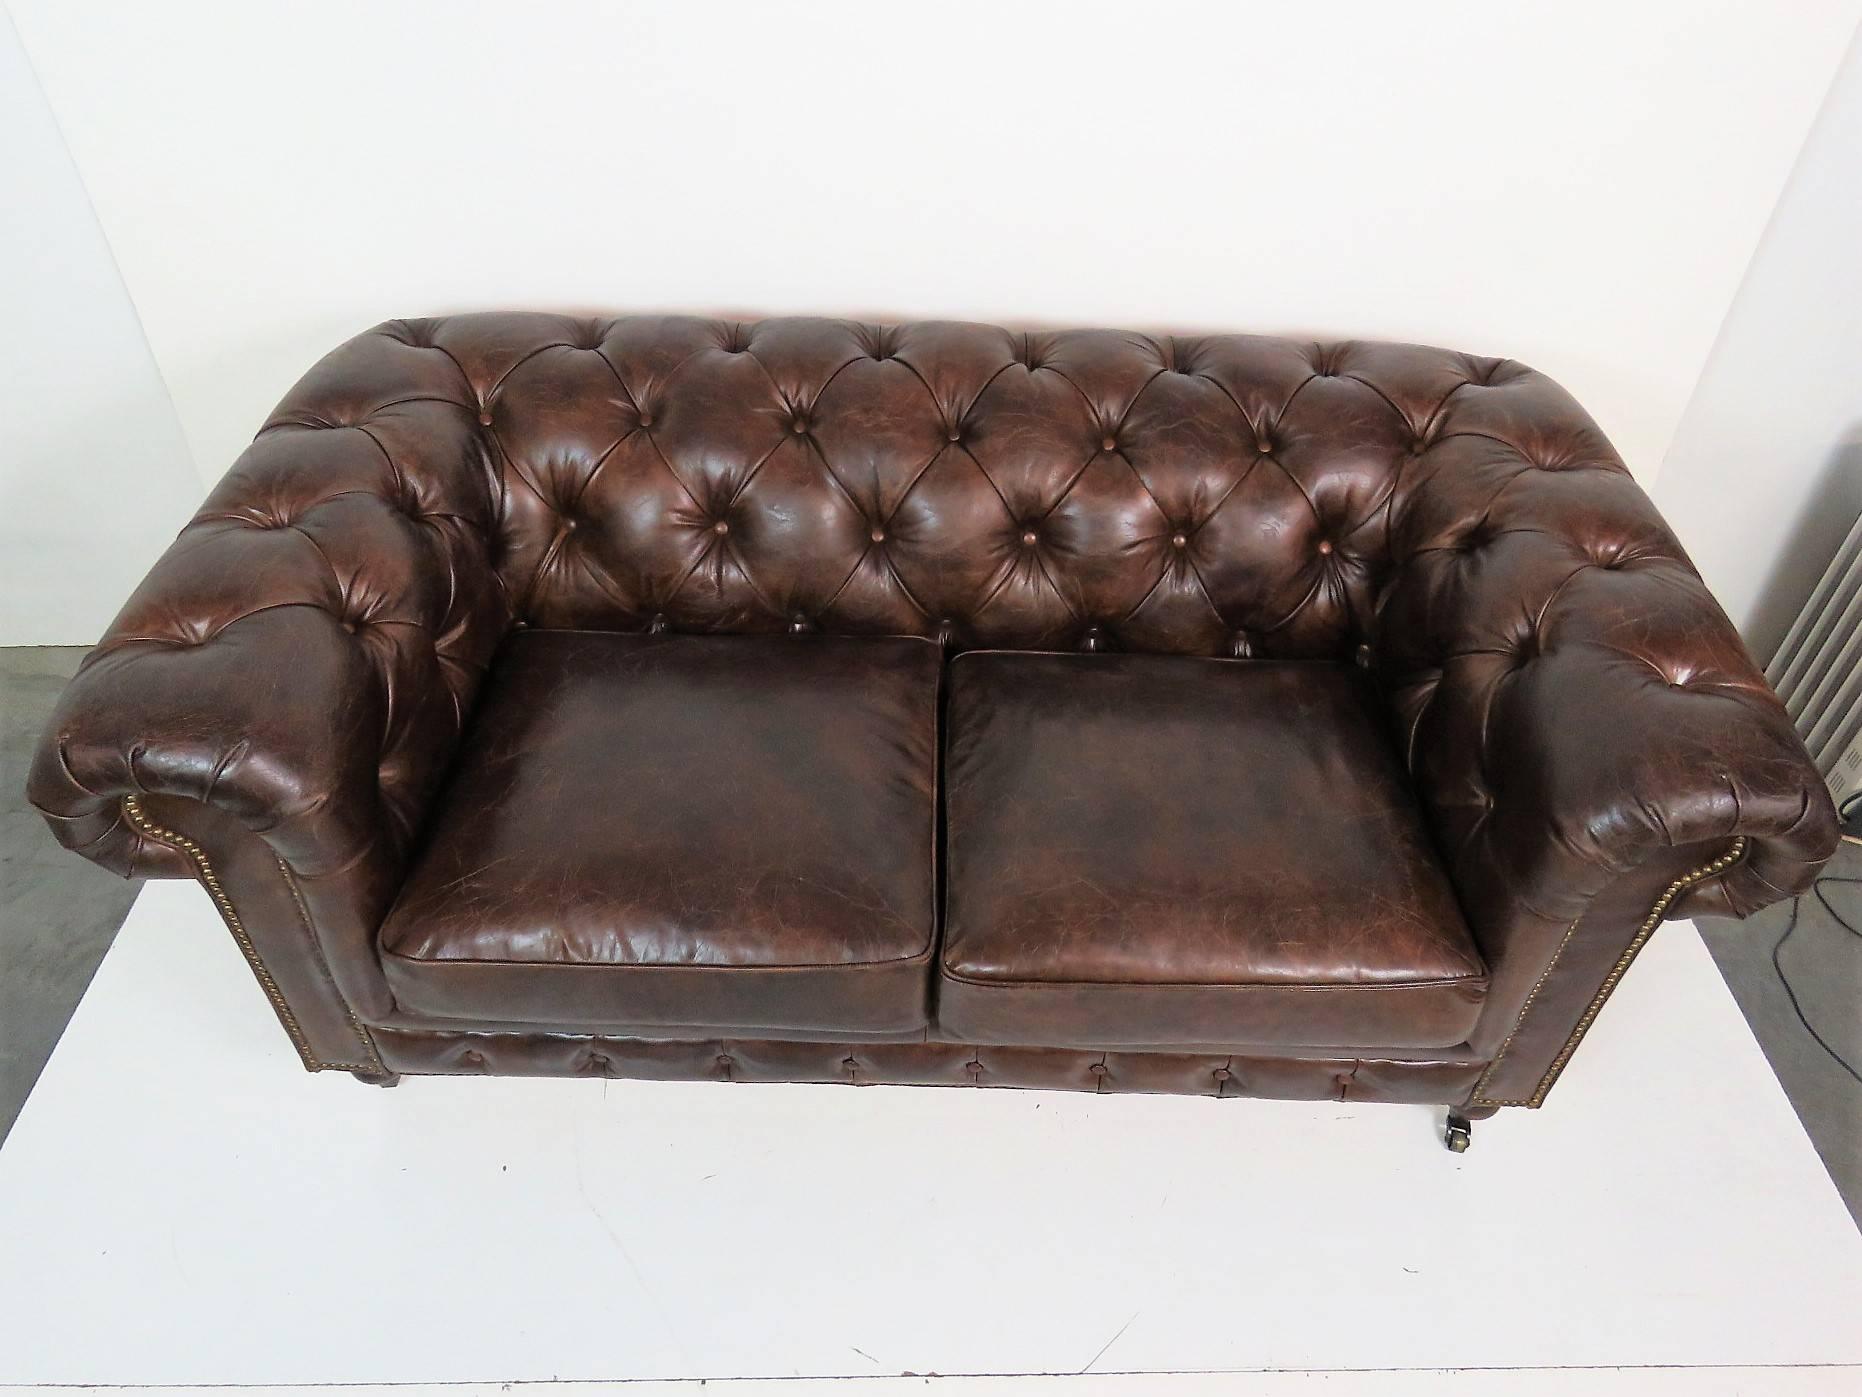 Distressed brown tufted leather.